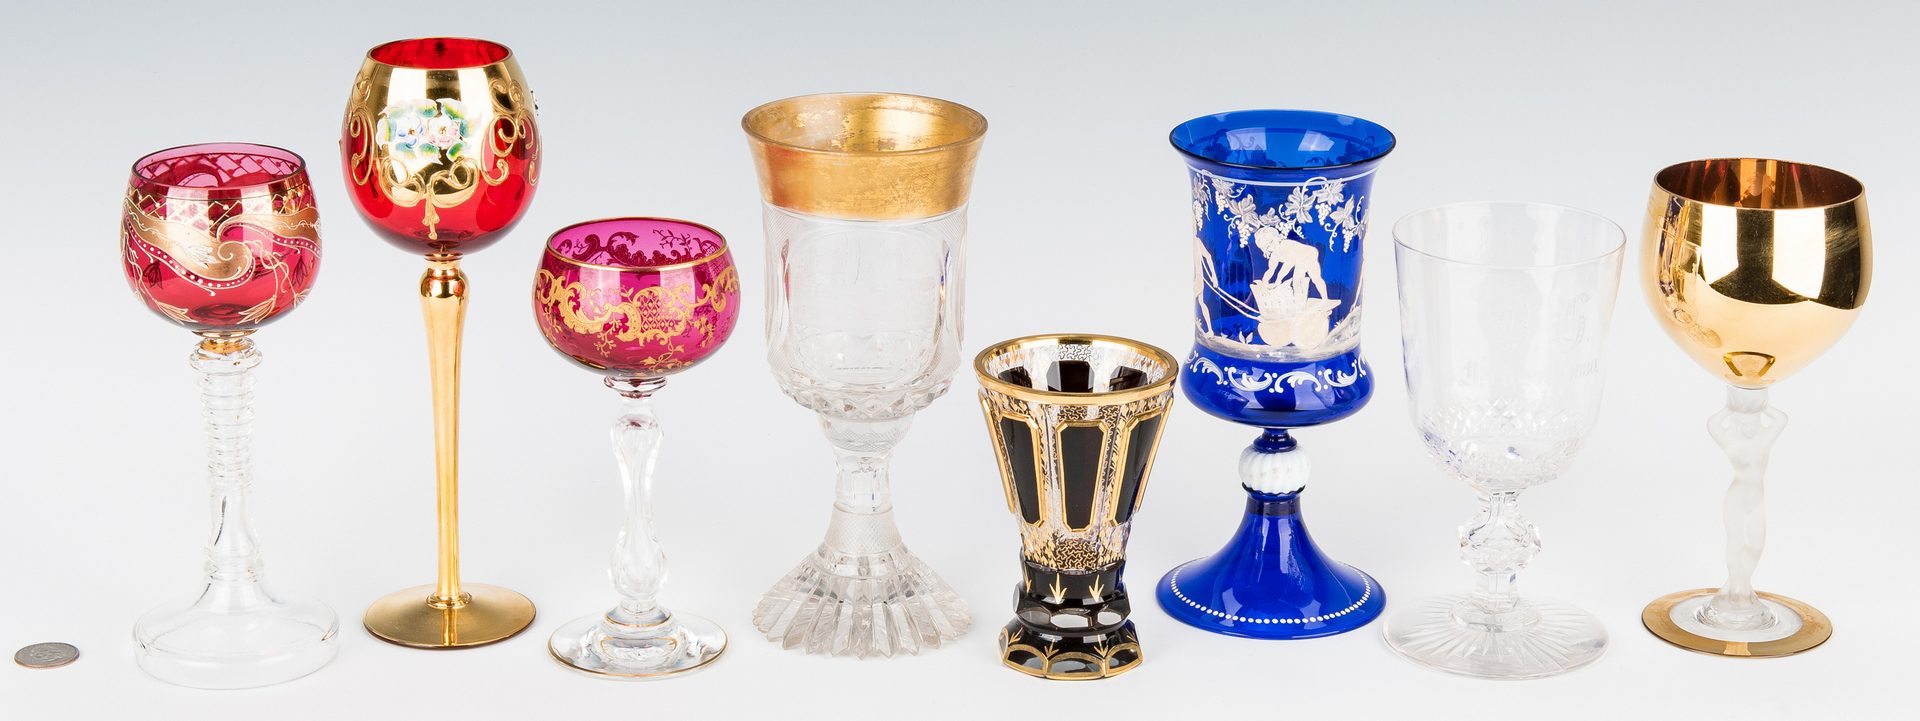 Lot 216: Collection of 8 Art & Cut Glass Goblets